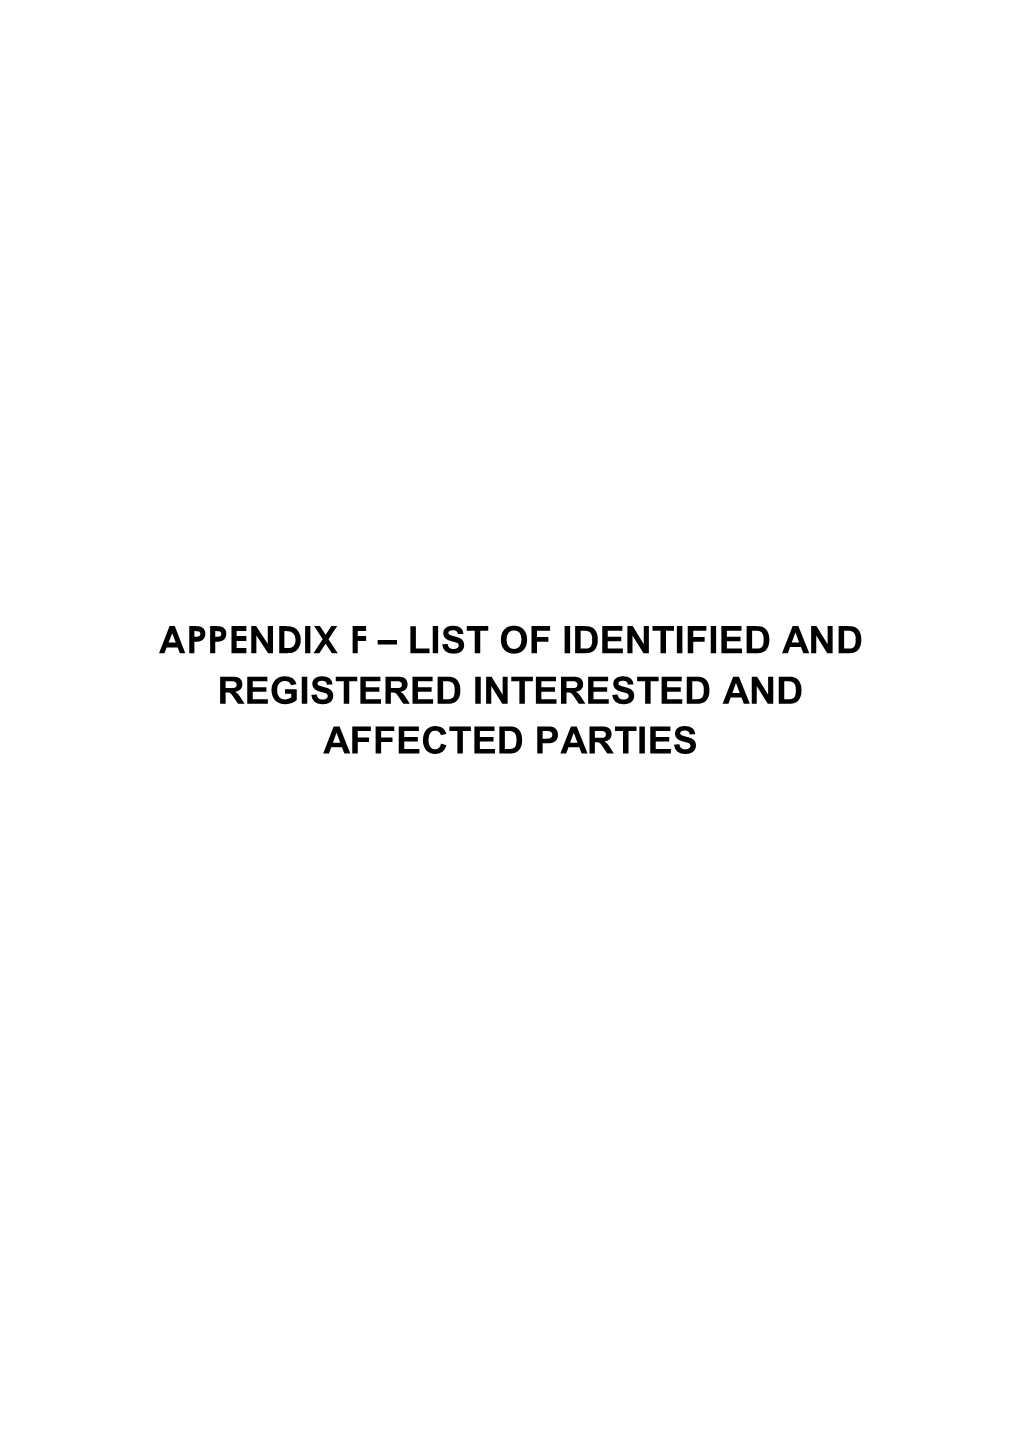 Appendix F – List of Identified and Registered Interested and Affected Parties